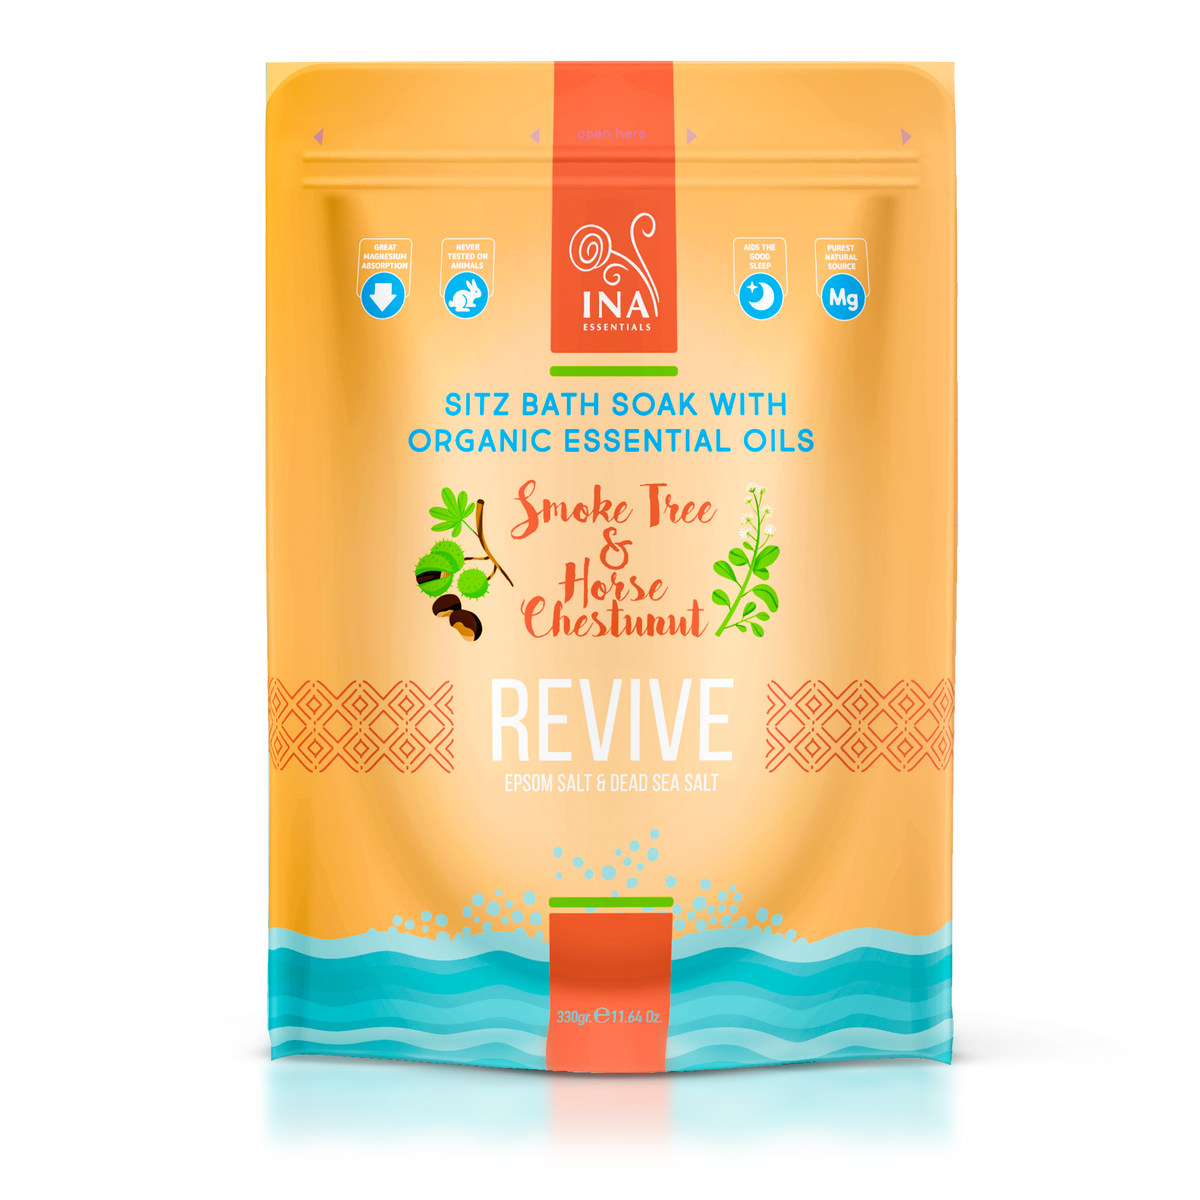 Revive - Bathing salt with Smoke Tree and Horse Chestnut for Varicose and Postpartum care